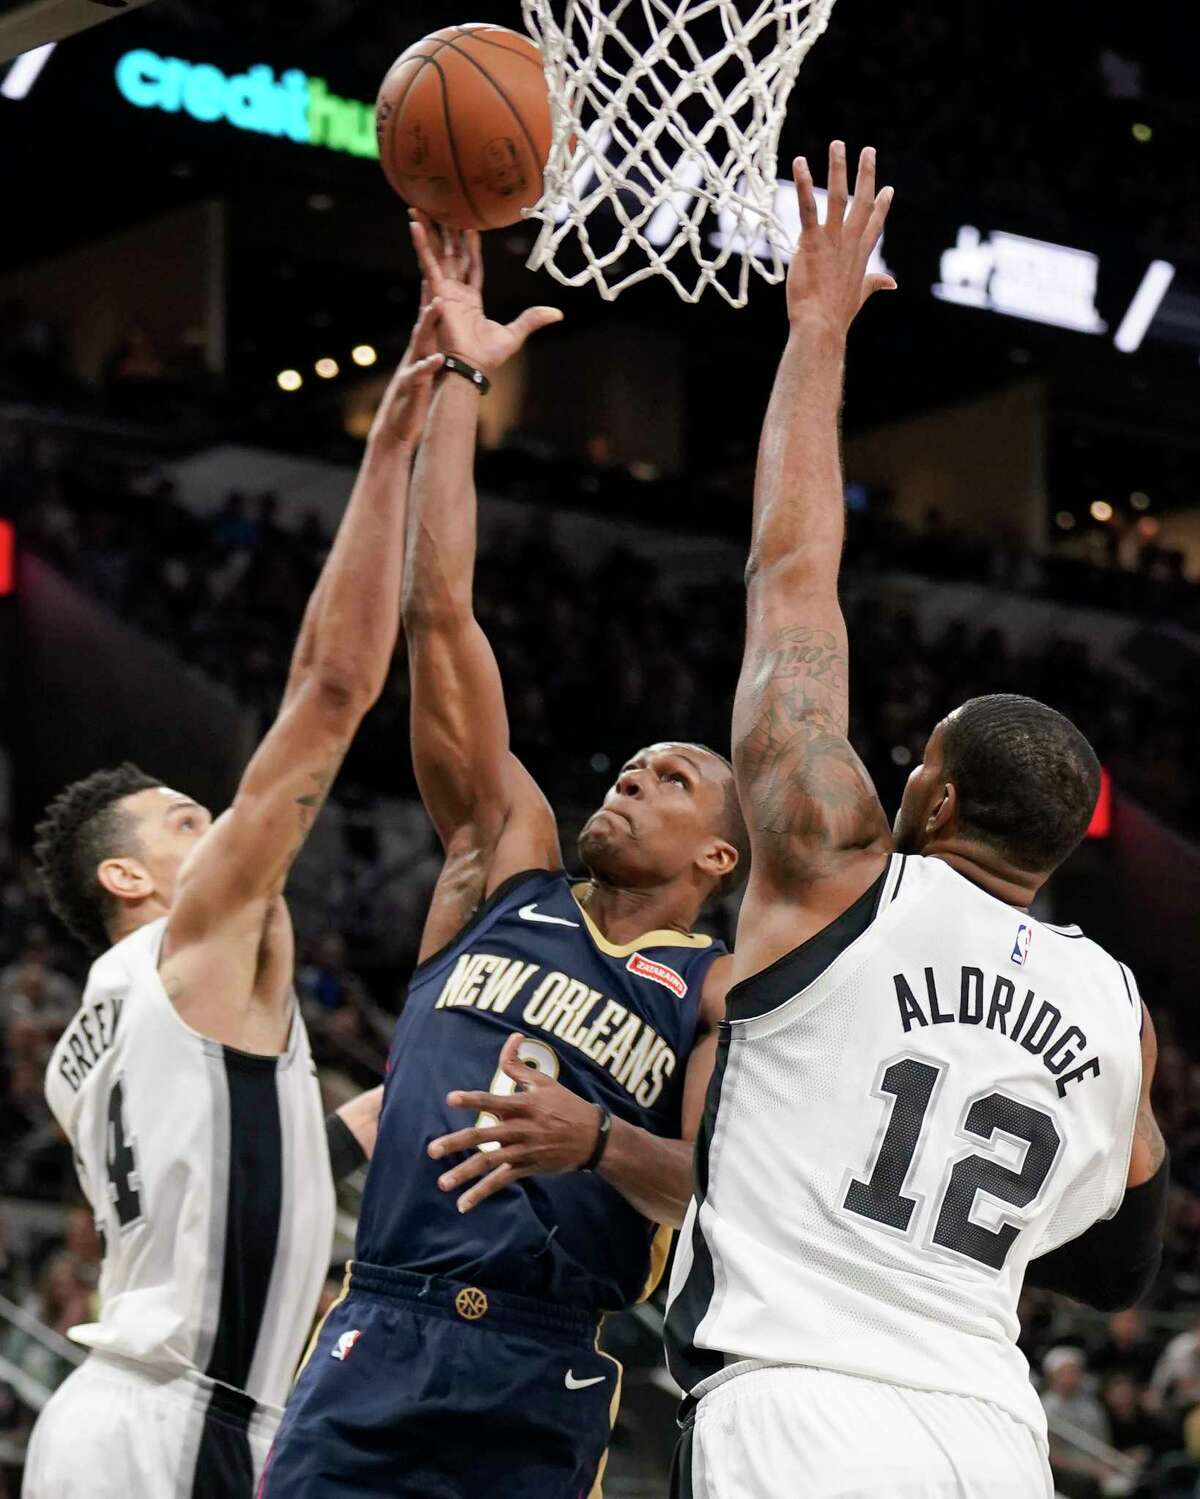 New Orleans Pelicans' Rajon Rondo, center, shoots against San Antonio Spurs' LaMarcus Aldridge (12) and Danny Green during the first half of an NBA basketball game, Thursday, March 15, 2018, in San Antonio. (AP Photo/Darren Abate)